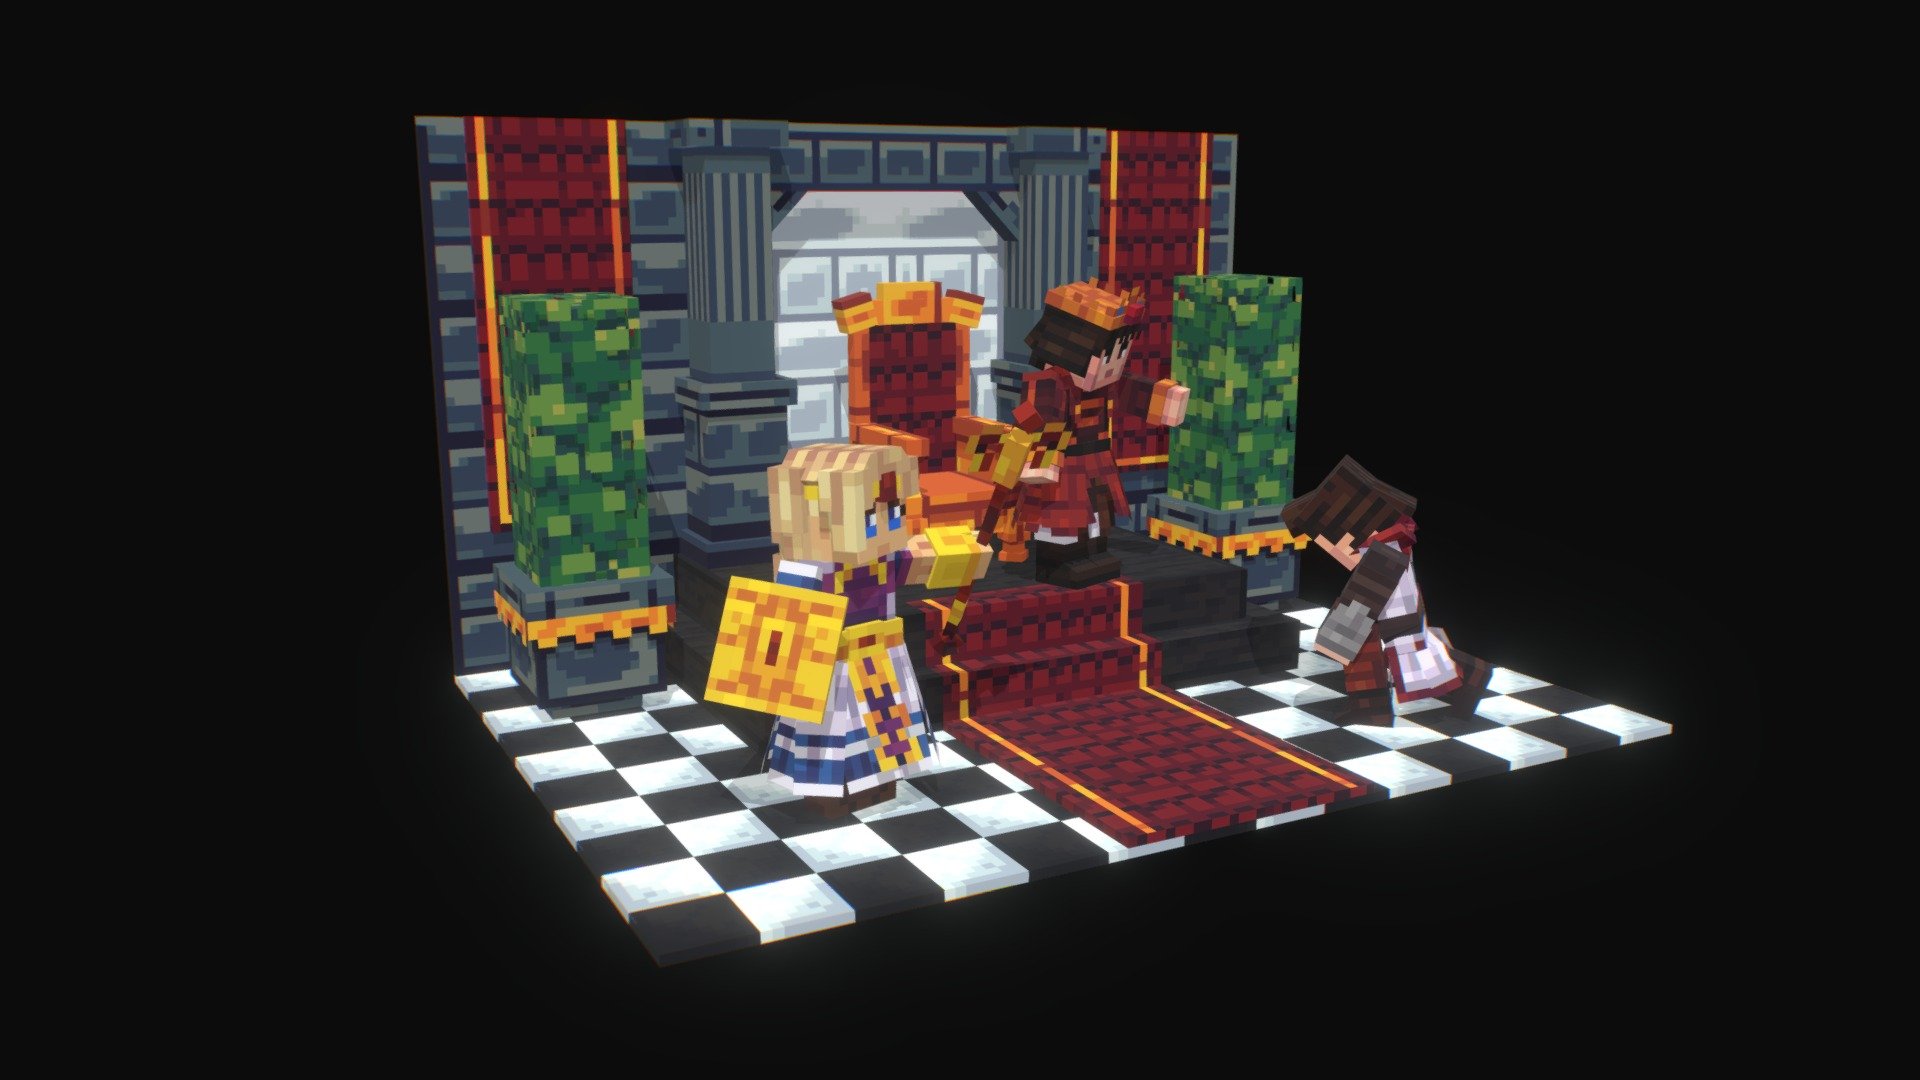 Throne room model with some characters. Made with blockbench.
feat. @fubucreator - Throne Room - 3D model by Victim (@digitalvictim) 3d model